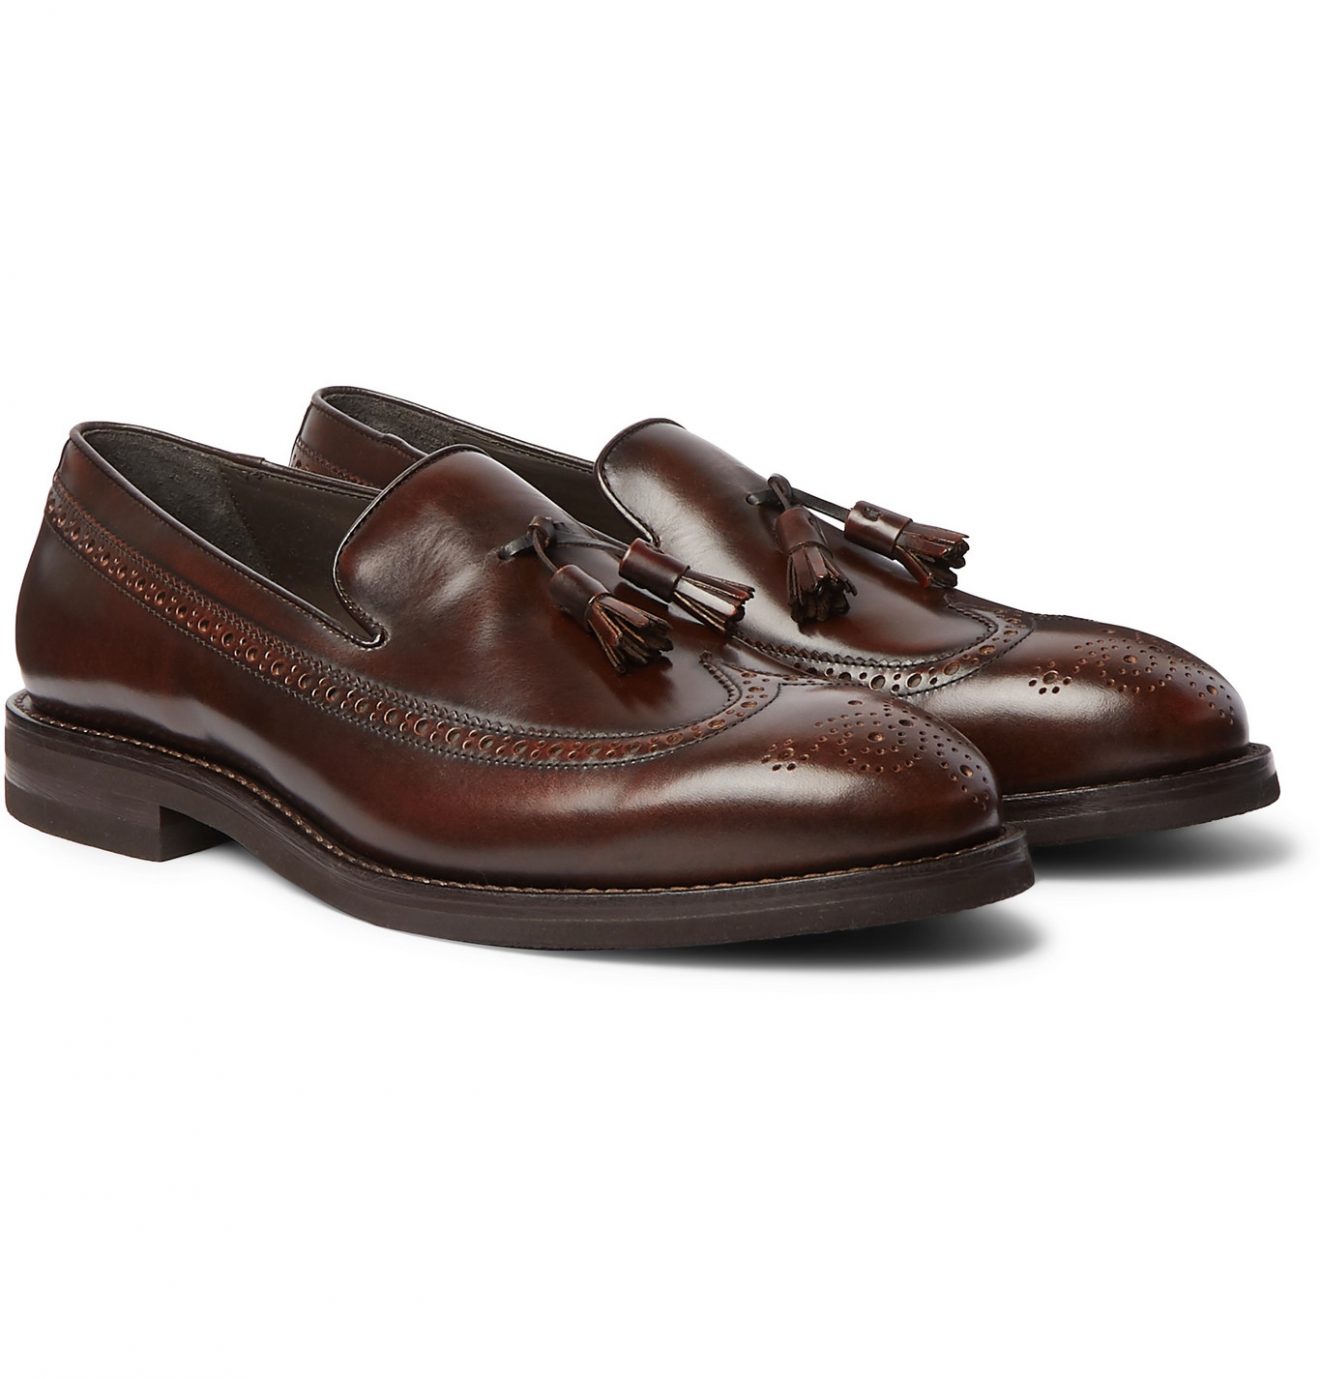 Brunello Cucinelli - Leather Tasselled Loafers - Men - Brown | The ...